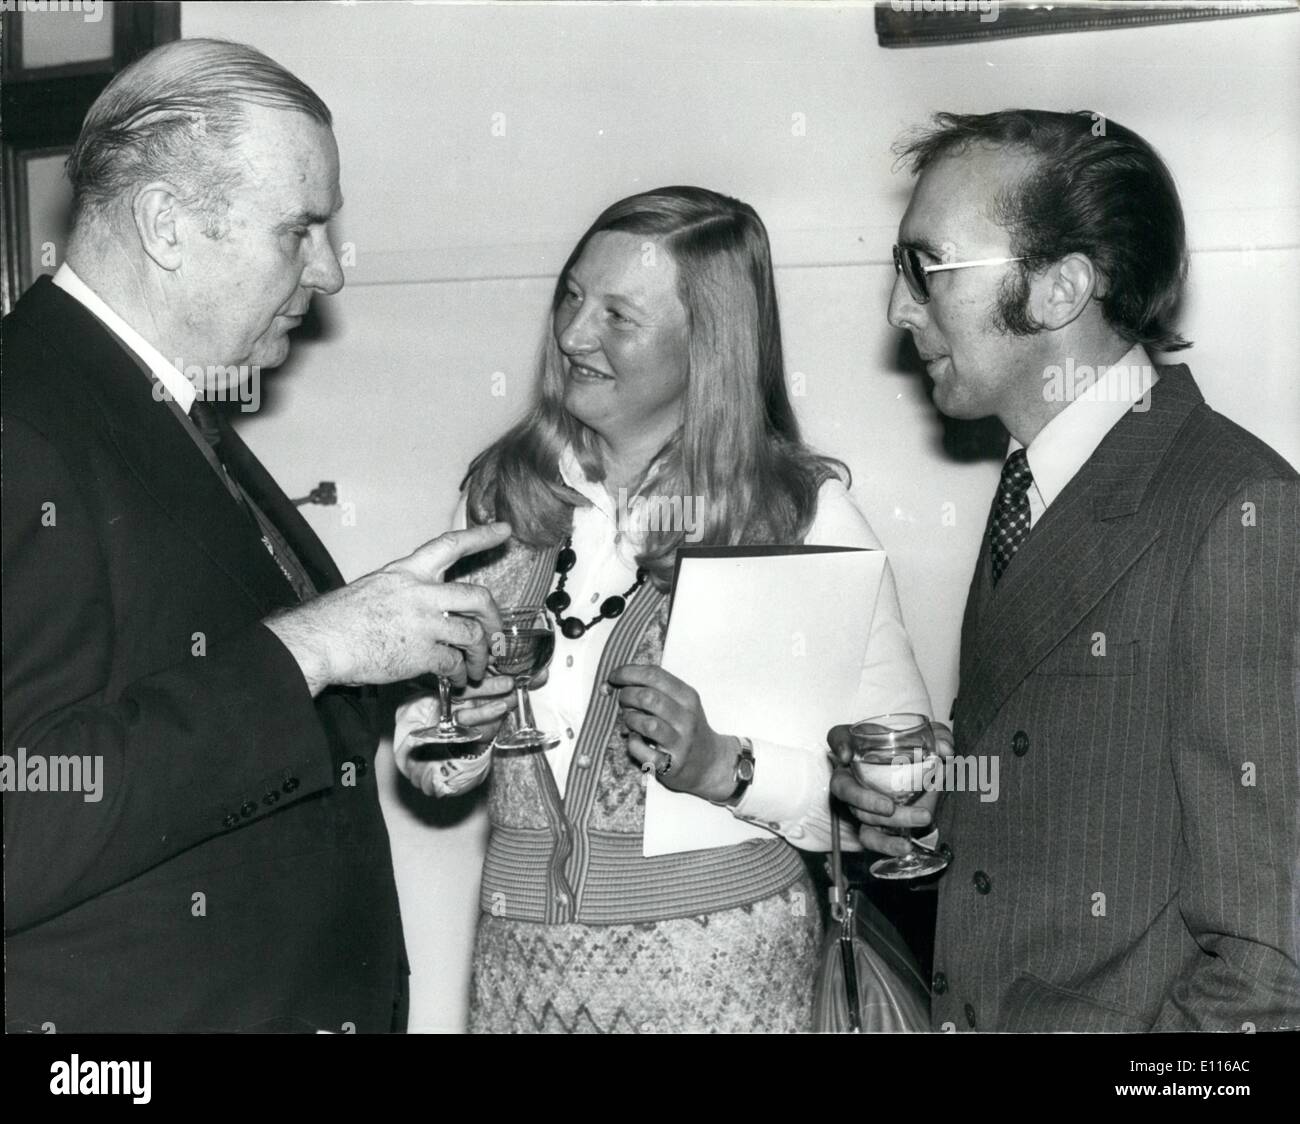 Feb. 02, 1976 - The Victoria Sporting Club International Award For Valour In Sport luncheon At London's Guildhall: A host of sporting personalities were present today at a luncheon at London's Guildhall to honour the rrecipients of the first ever International Awards For Courage in Sport. Instituted by the Victoria Sporting Club, an award is to be presented each year to ''the man or women'', professional or amateur, who, by an act of courage in a single incident or in a sustained contribution of outstanding bravery, is worthy of winning it Stock Photo